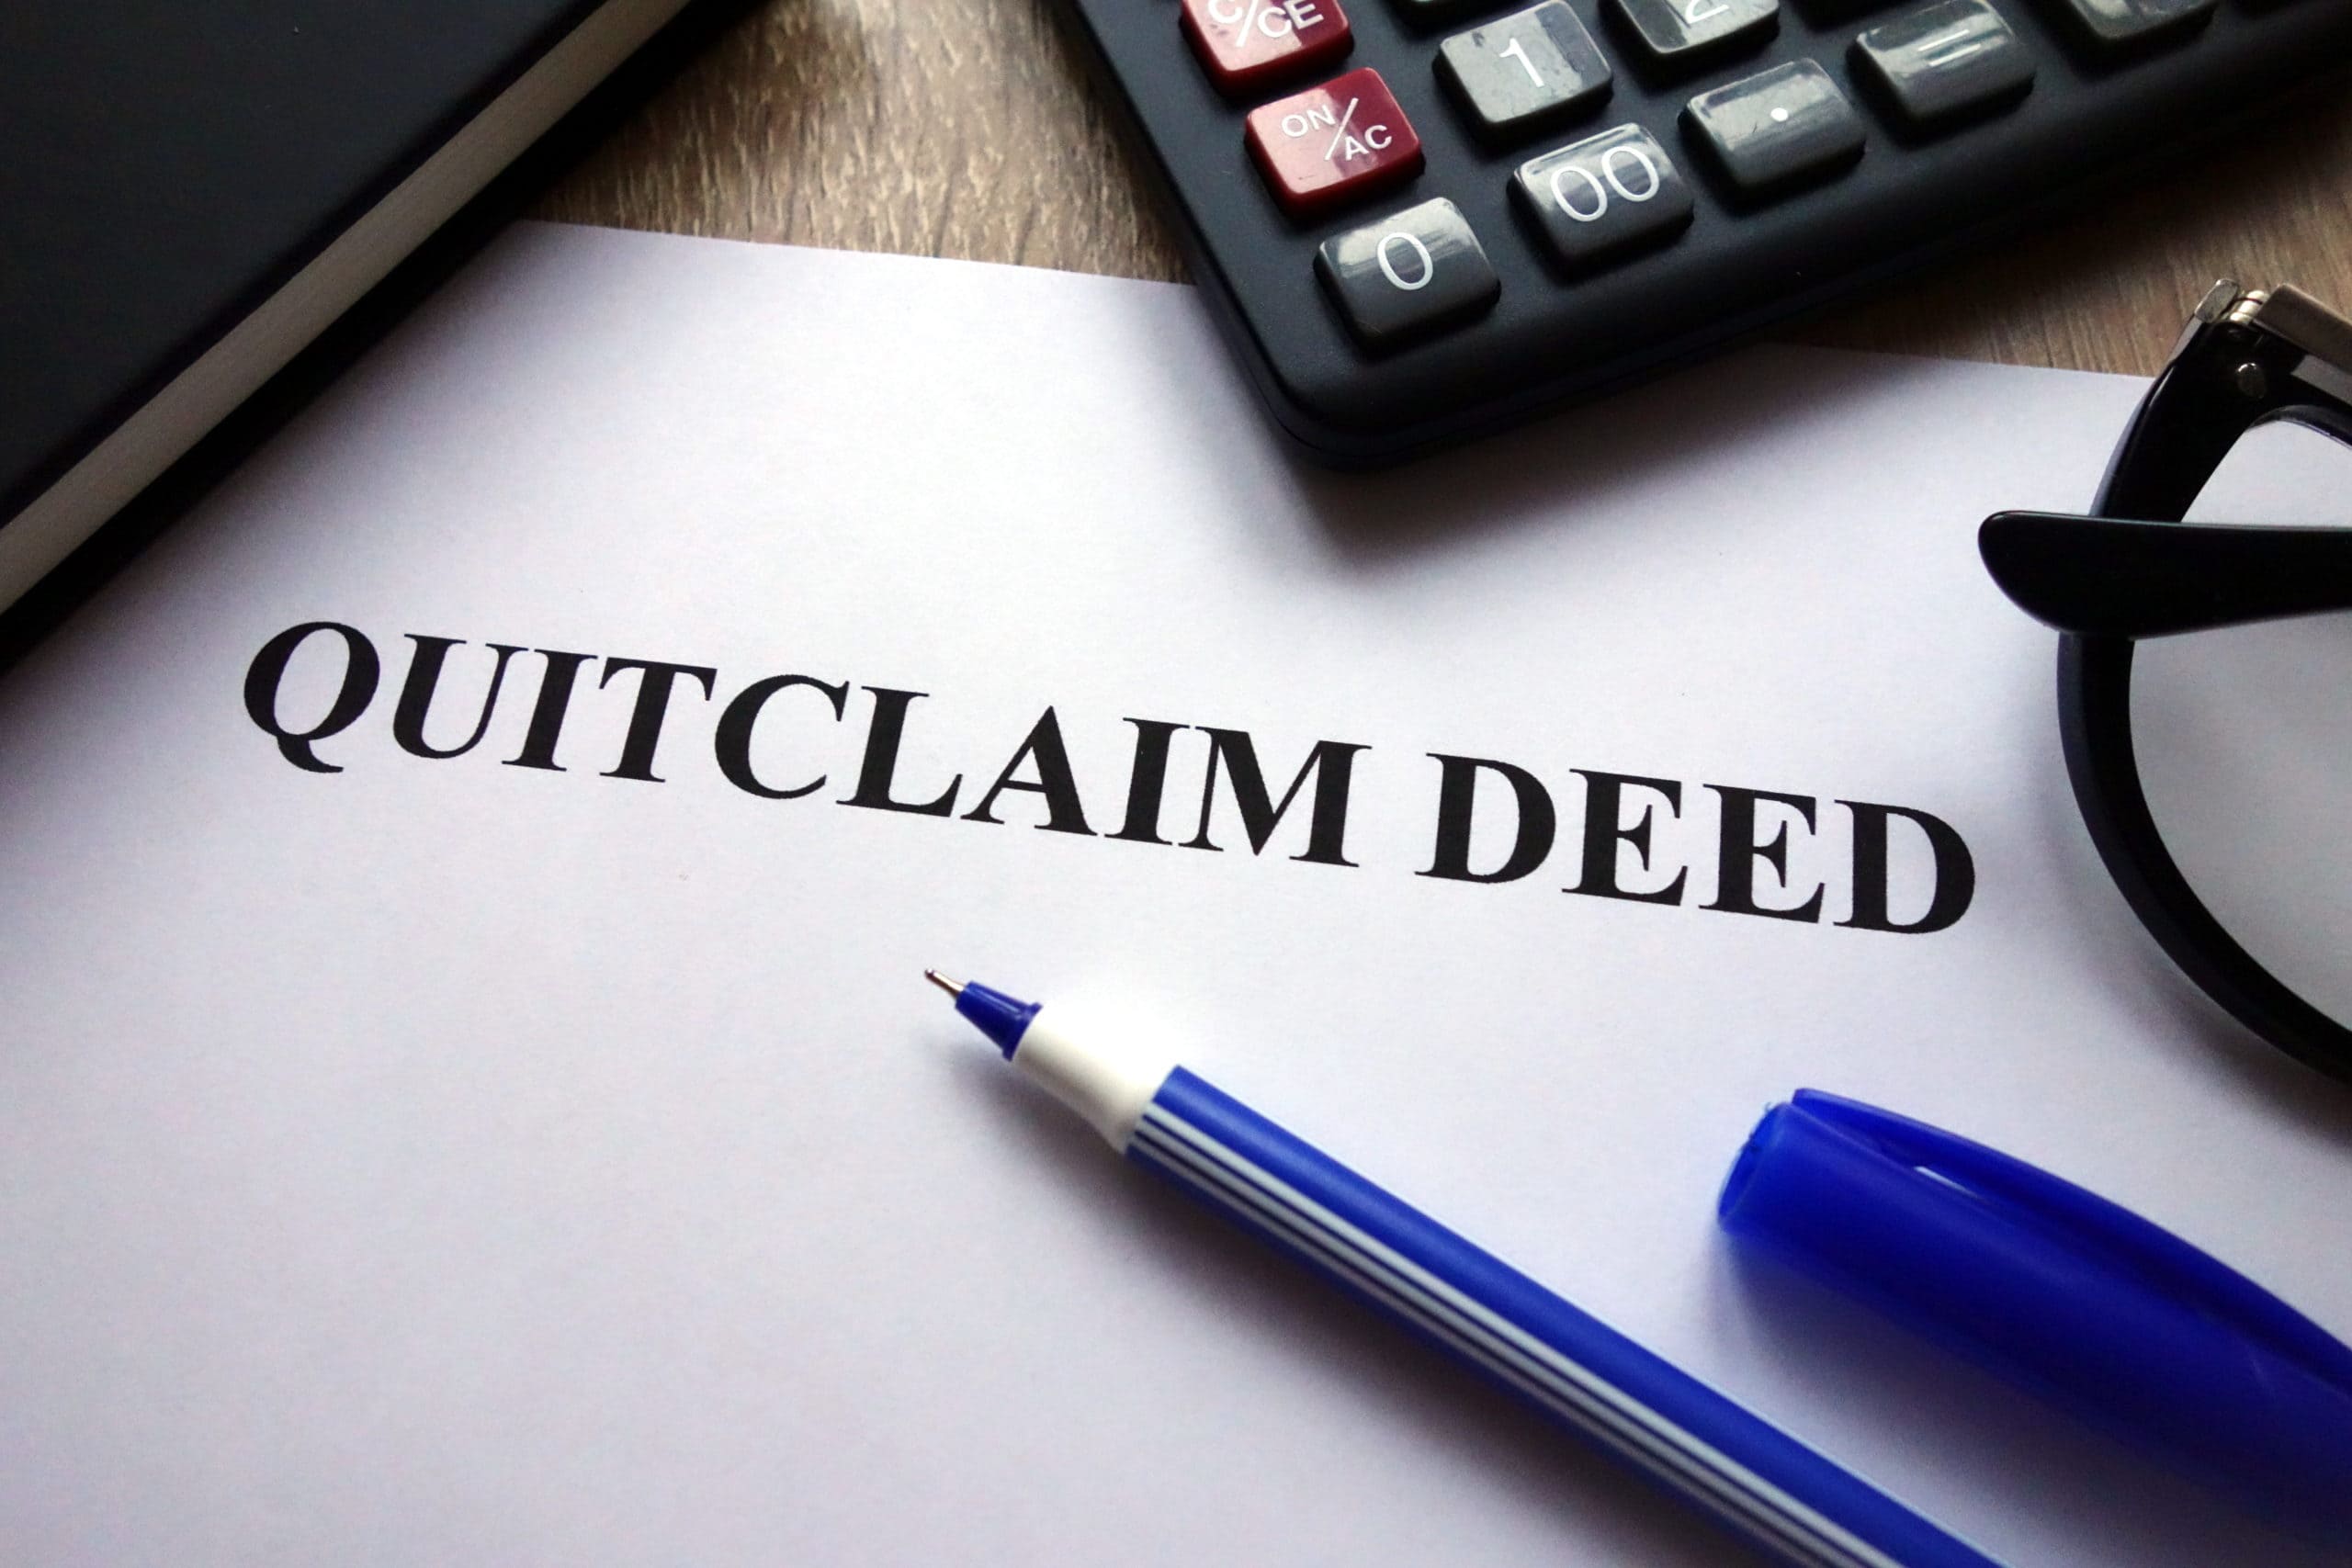 Paper with quitclaim deed on it surrounded by desk supplies